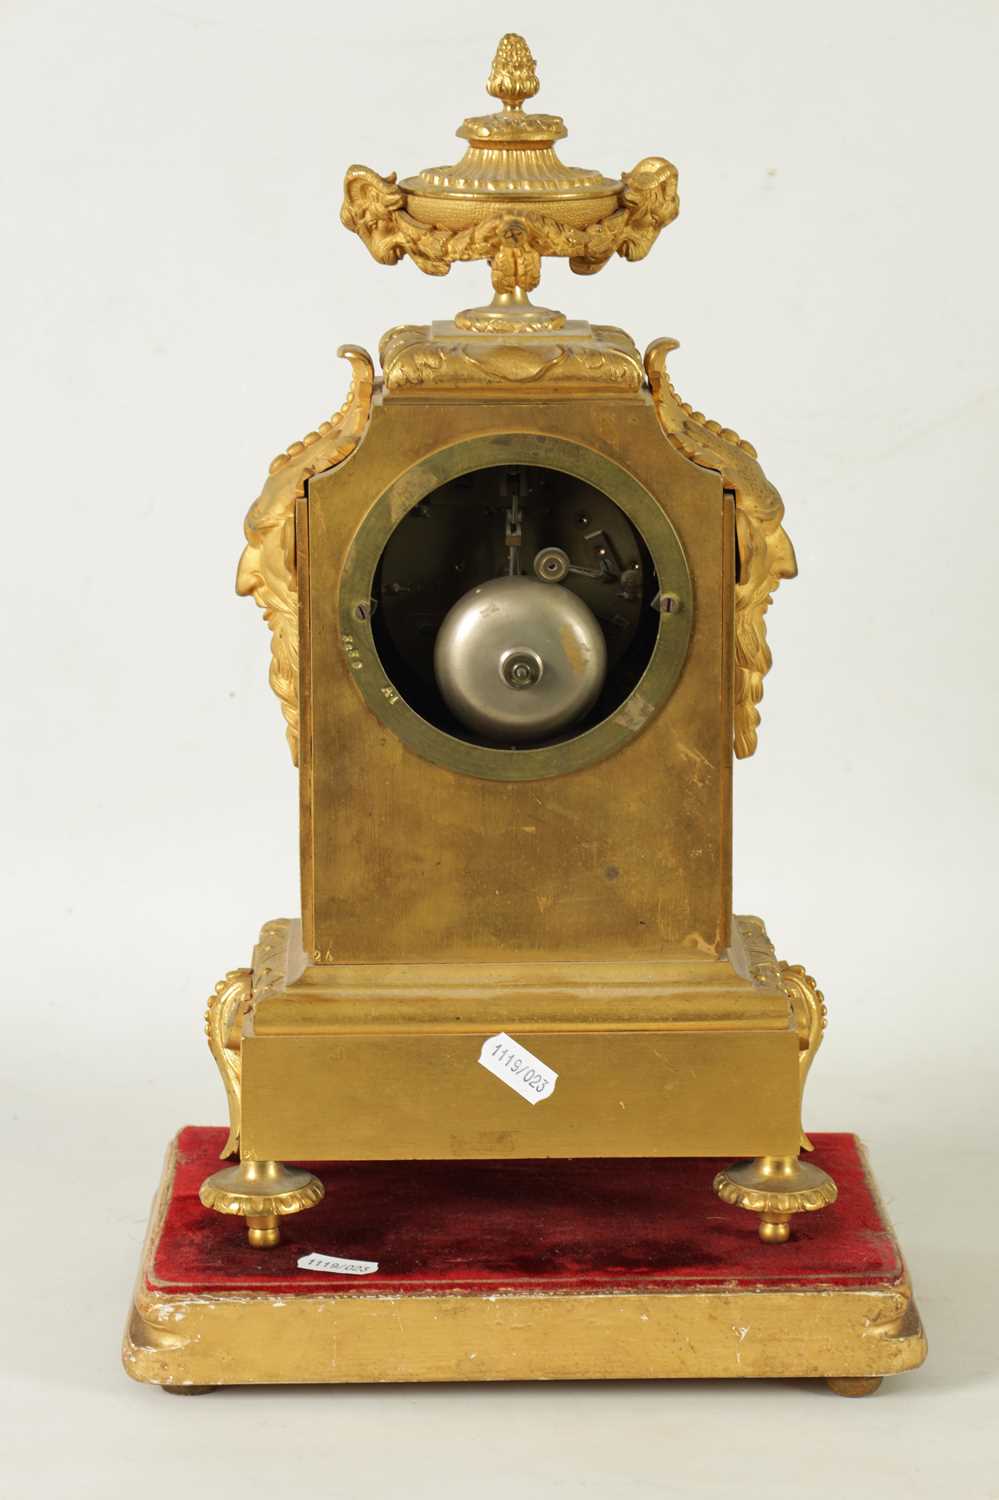 A LATE 19TH CENTURY FRENCH ORMOLU AND PORCELAIN PANELLED MANTEL CLOCK - Image 8 of 10